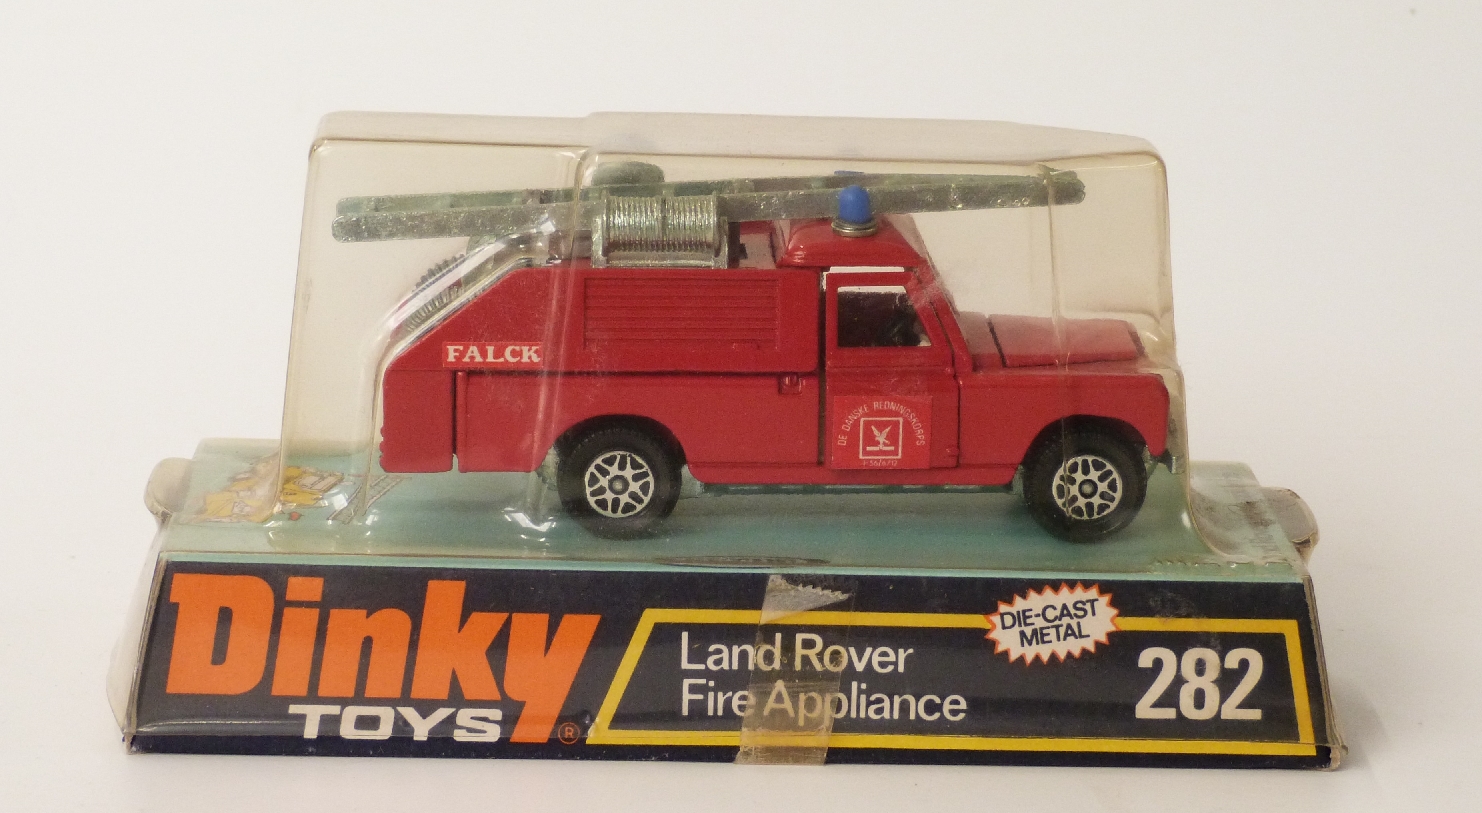 Dinky Toys diecast model Land Rover Fire Appliance 282,